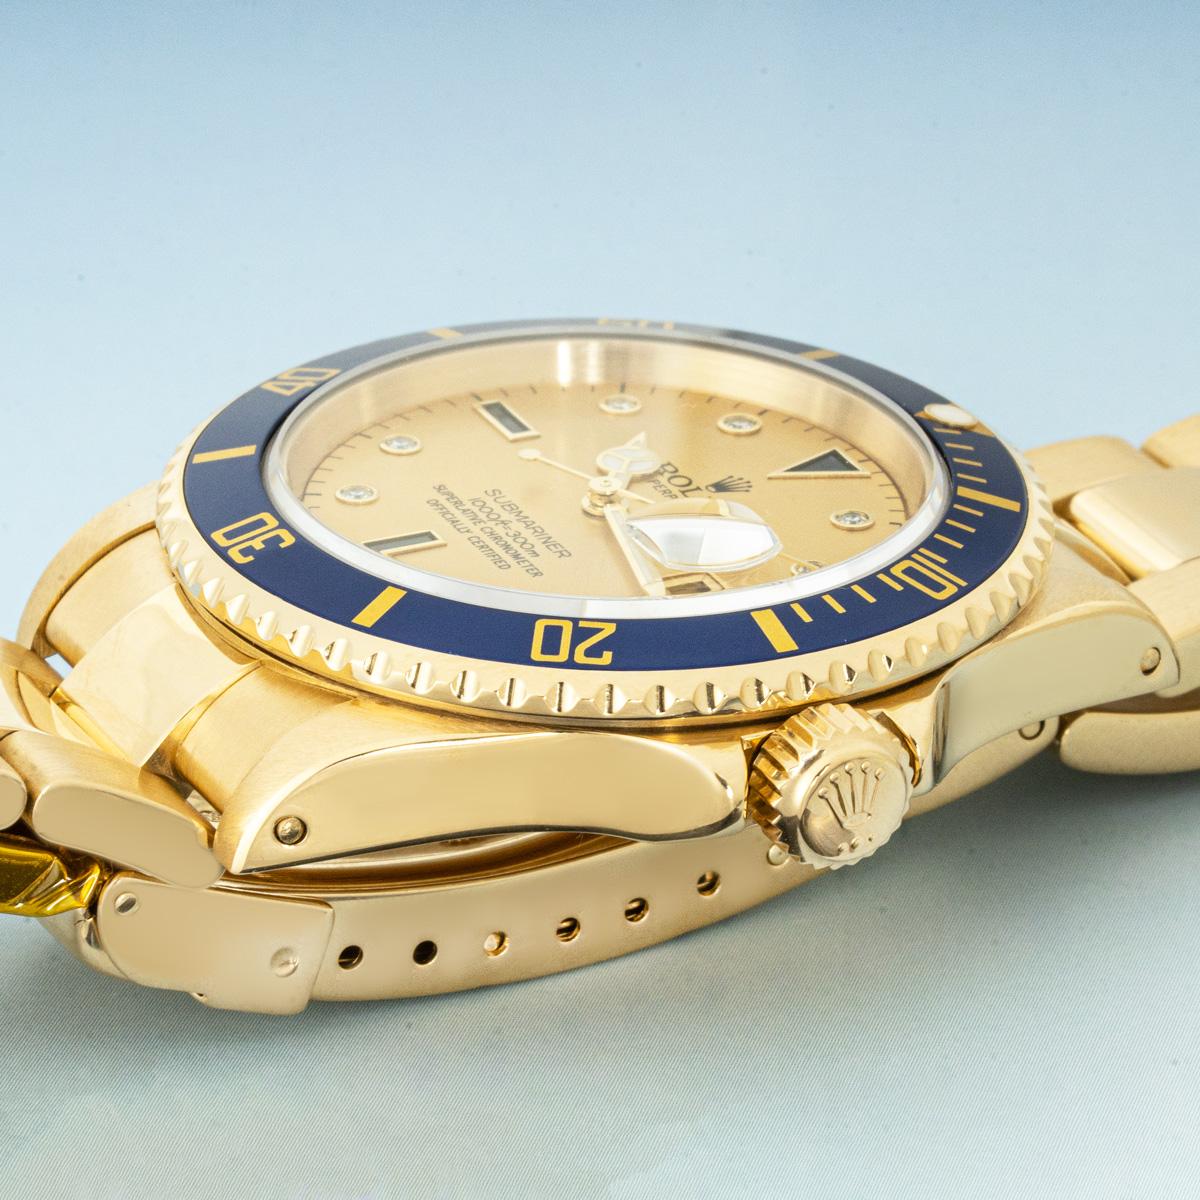 A men's 40mm Submariner in yellow gold by Rolex. Featuring a champagne serti dial (please note, the original dial was replaced with this serti dial during the Rolex service) set with 8 round brilliant cut diamonds, 3 sapphires and a date display.